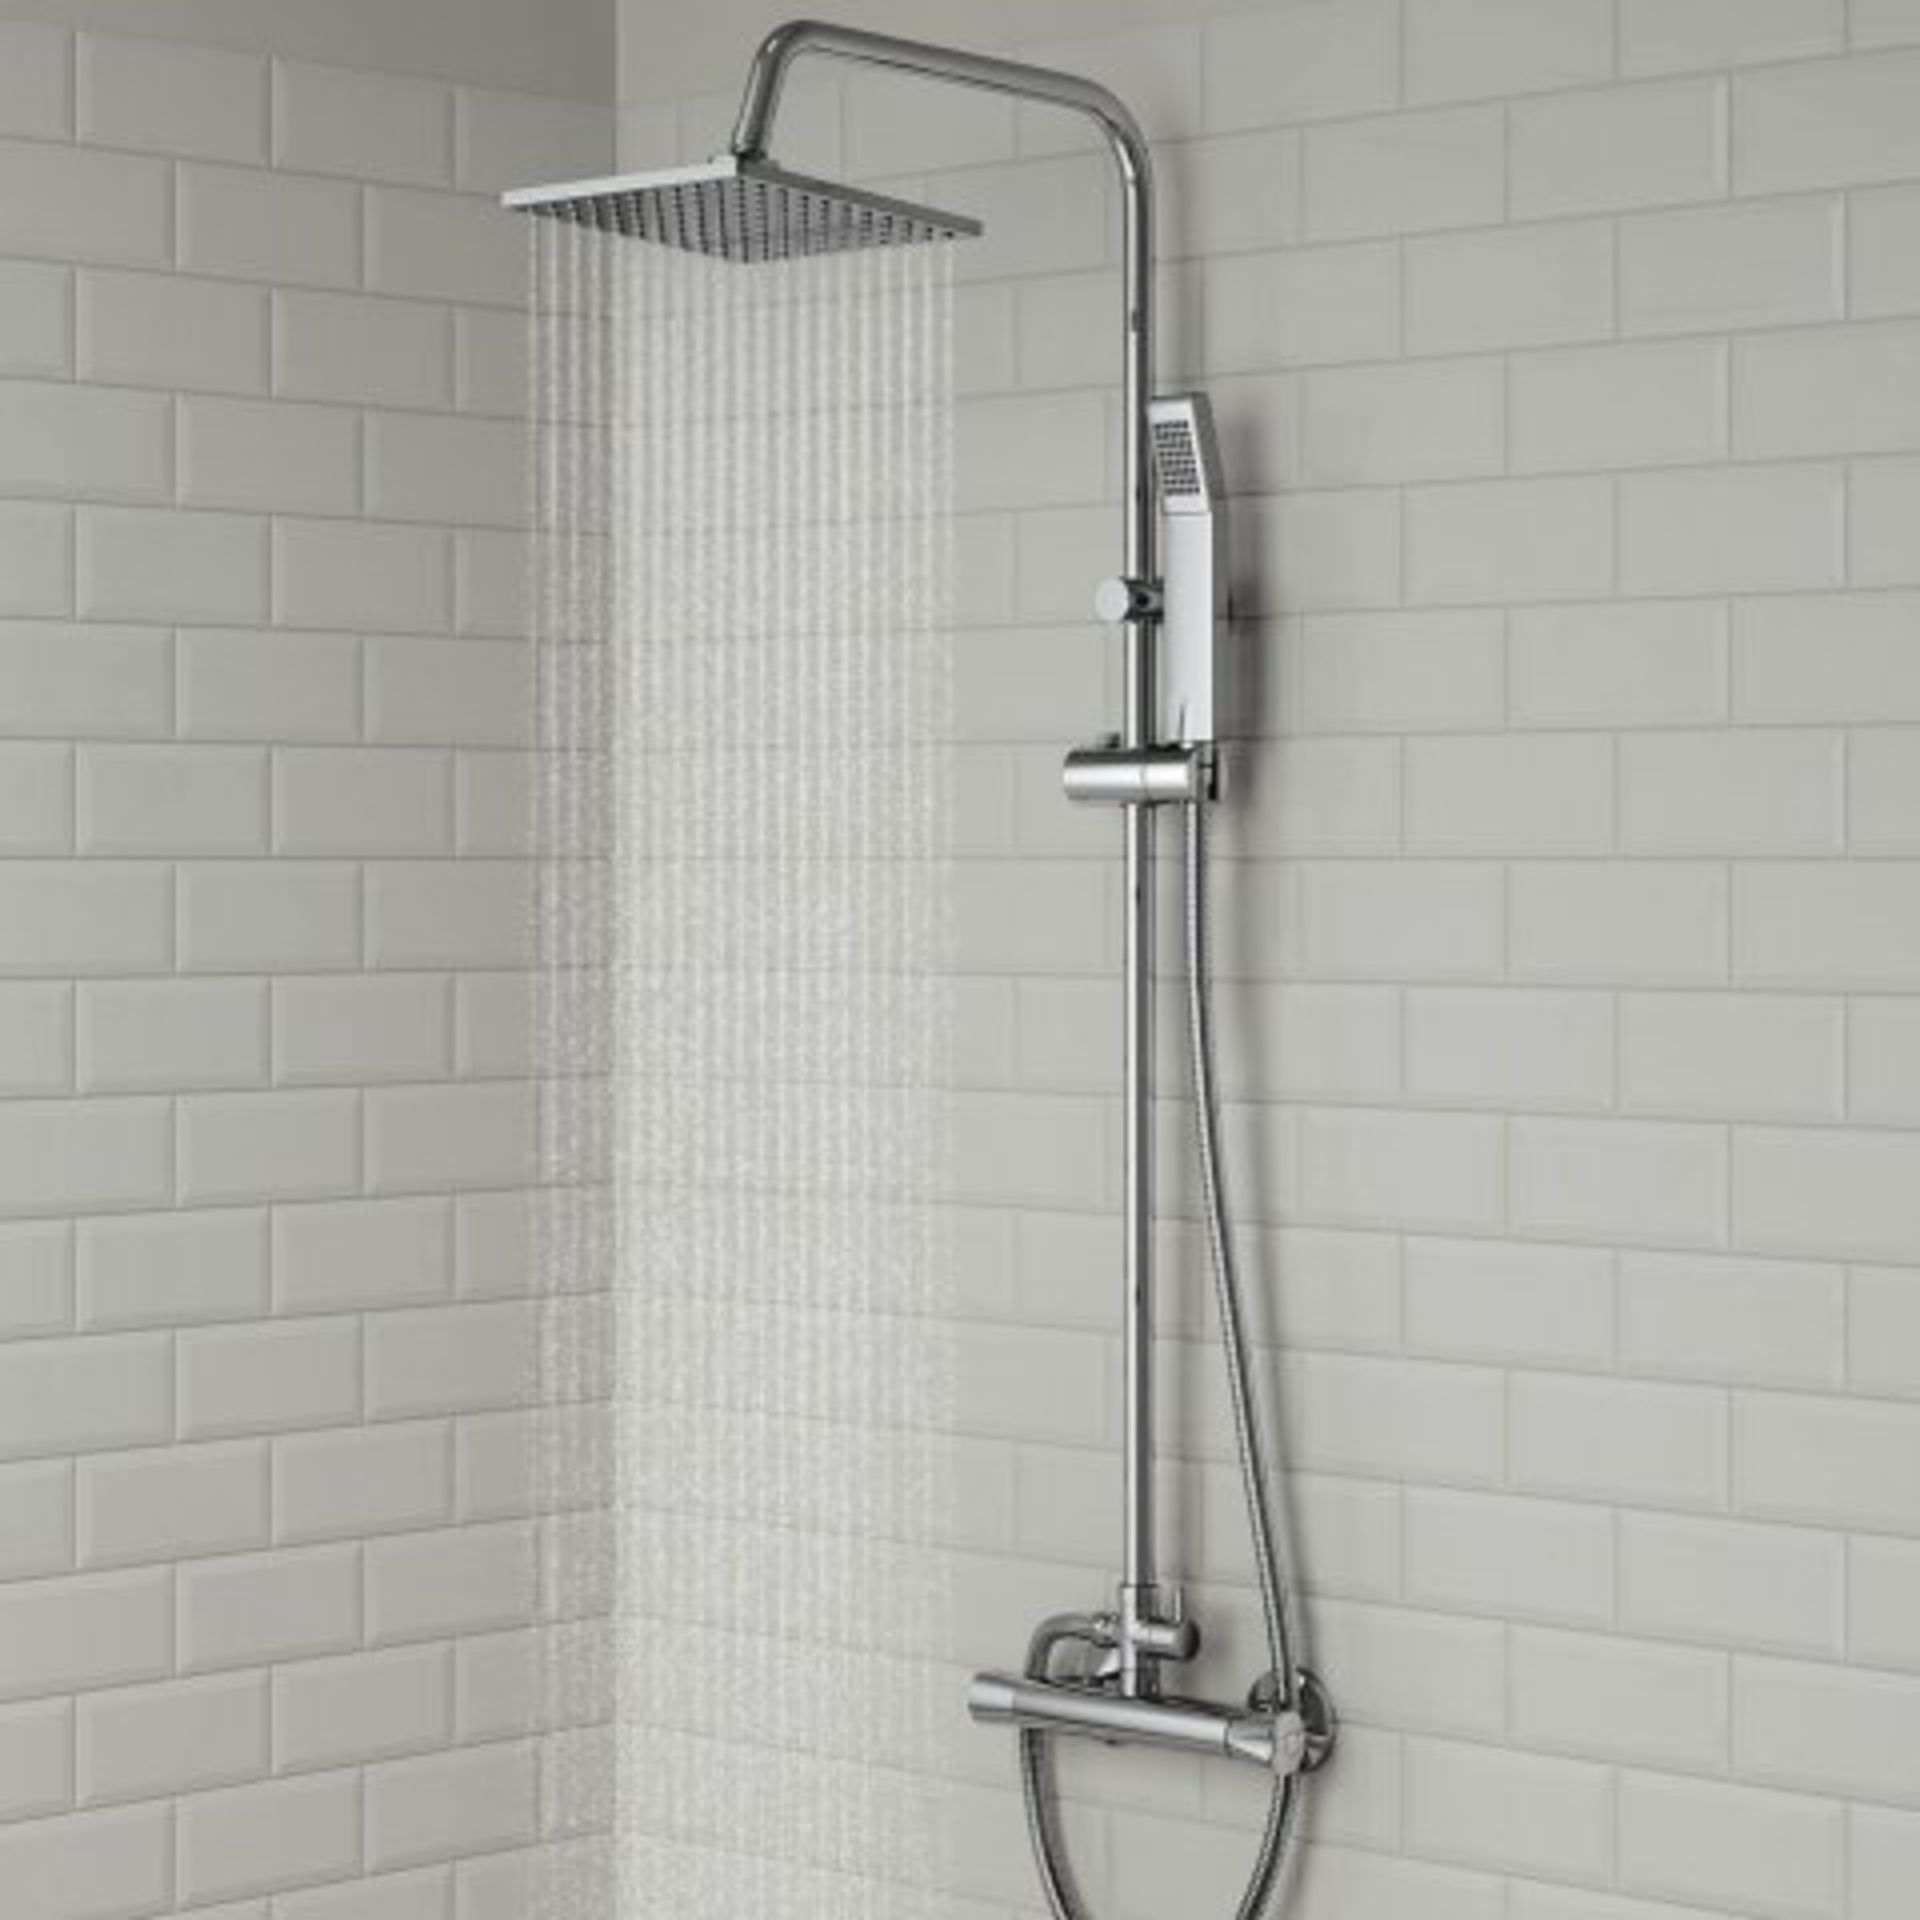 (M19) 200mm Square Head Thermostatic Exposed Shower Kit & Hand Held. RRP £249.99. Simplistic Style